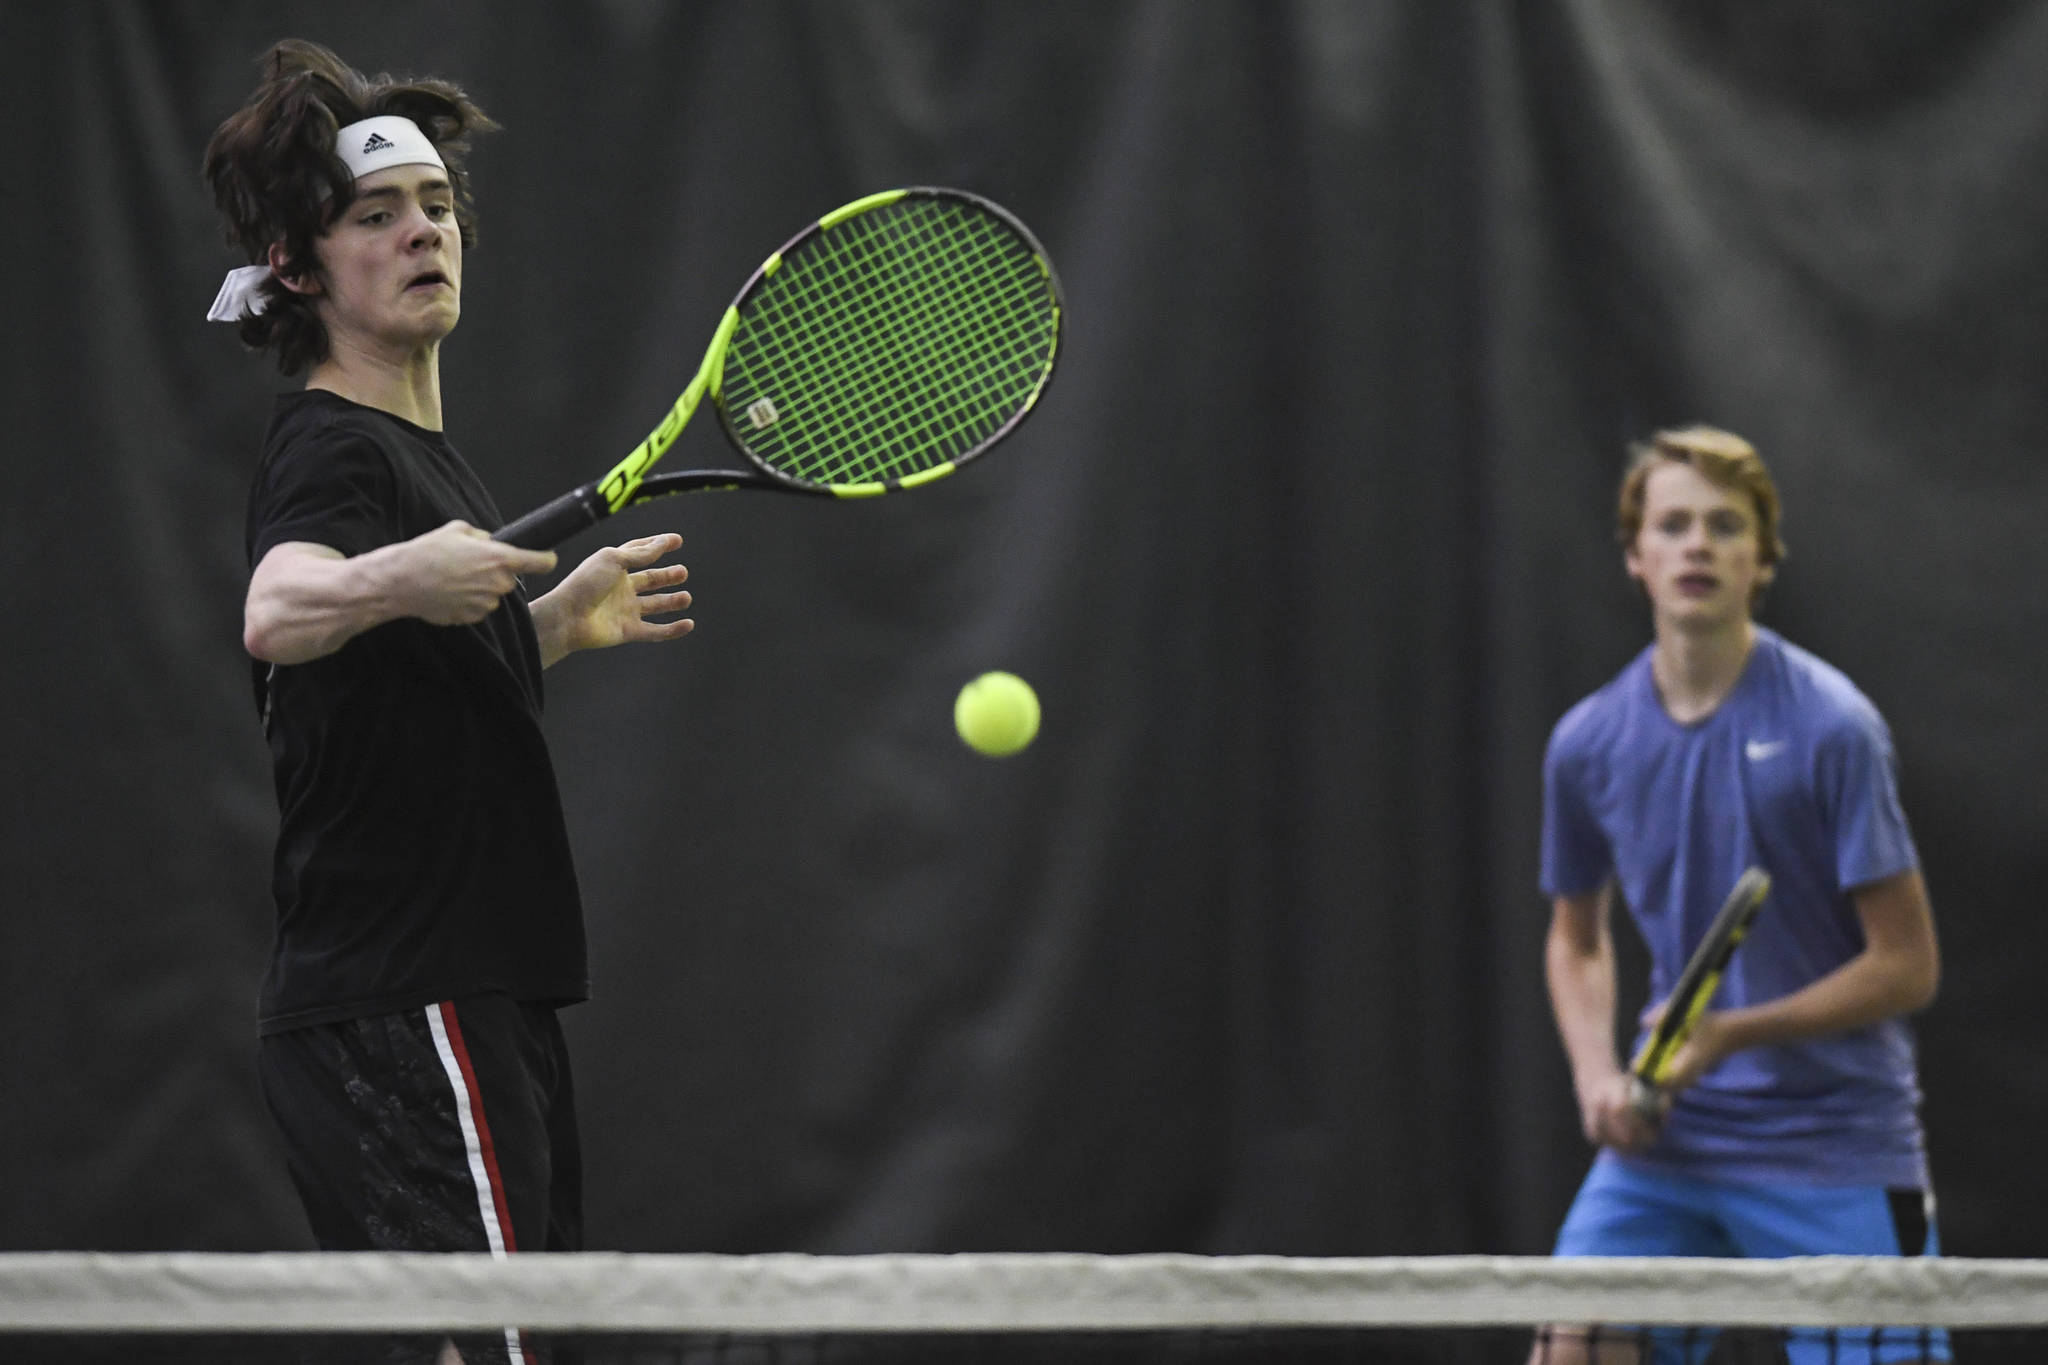 William Smoker, left, volleys in front of his partner, Will Rehfeldt as they play against Luke Bibb and Reed Loree at the Region V Tennis Tournament at The Alaska Club/JRC on Wednesday, Sept. 25, 2019. Smoker and Rehfeldt won the match 6-0, 6-0, and will play Liam Penn and Callan Smith in the final on Saturday. (Michael Penn | Juneau Empire)